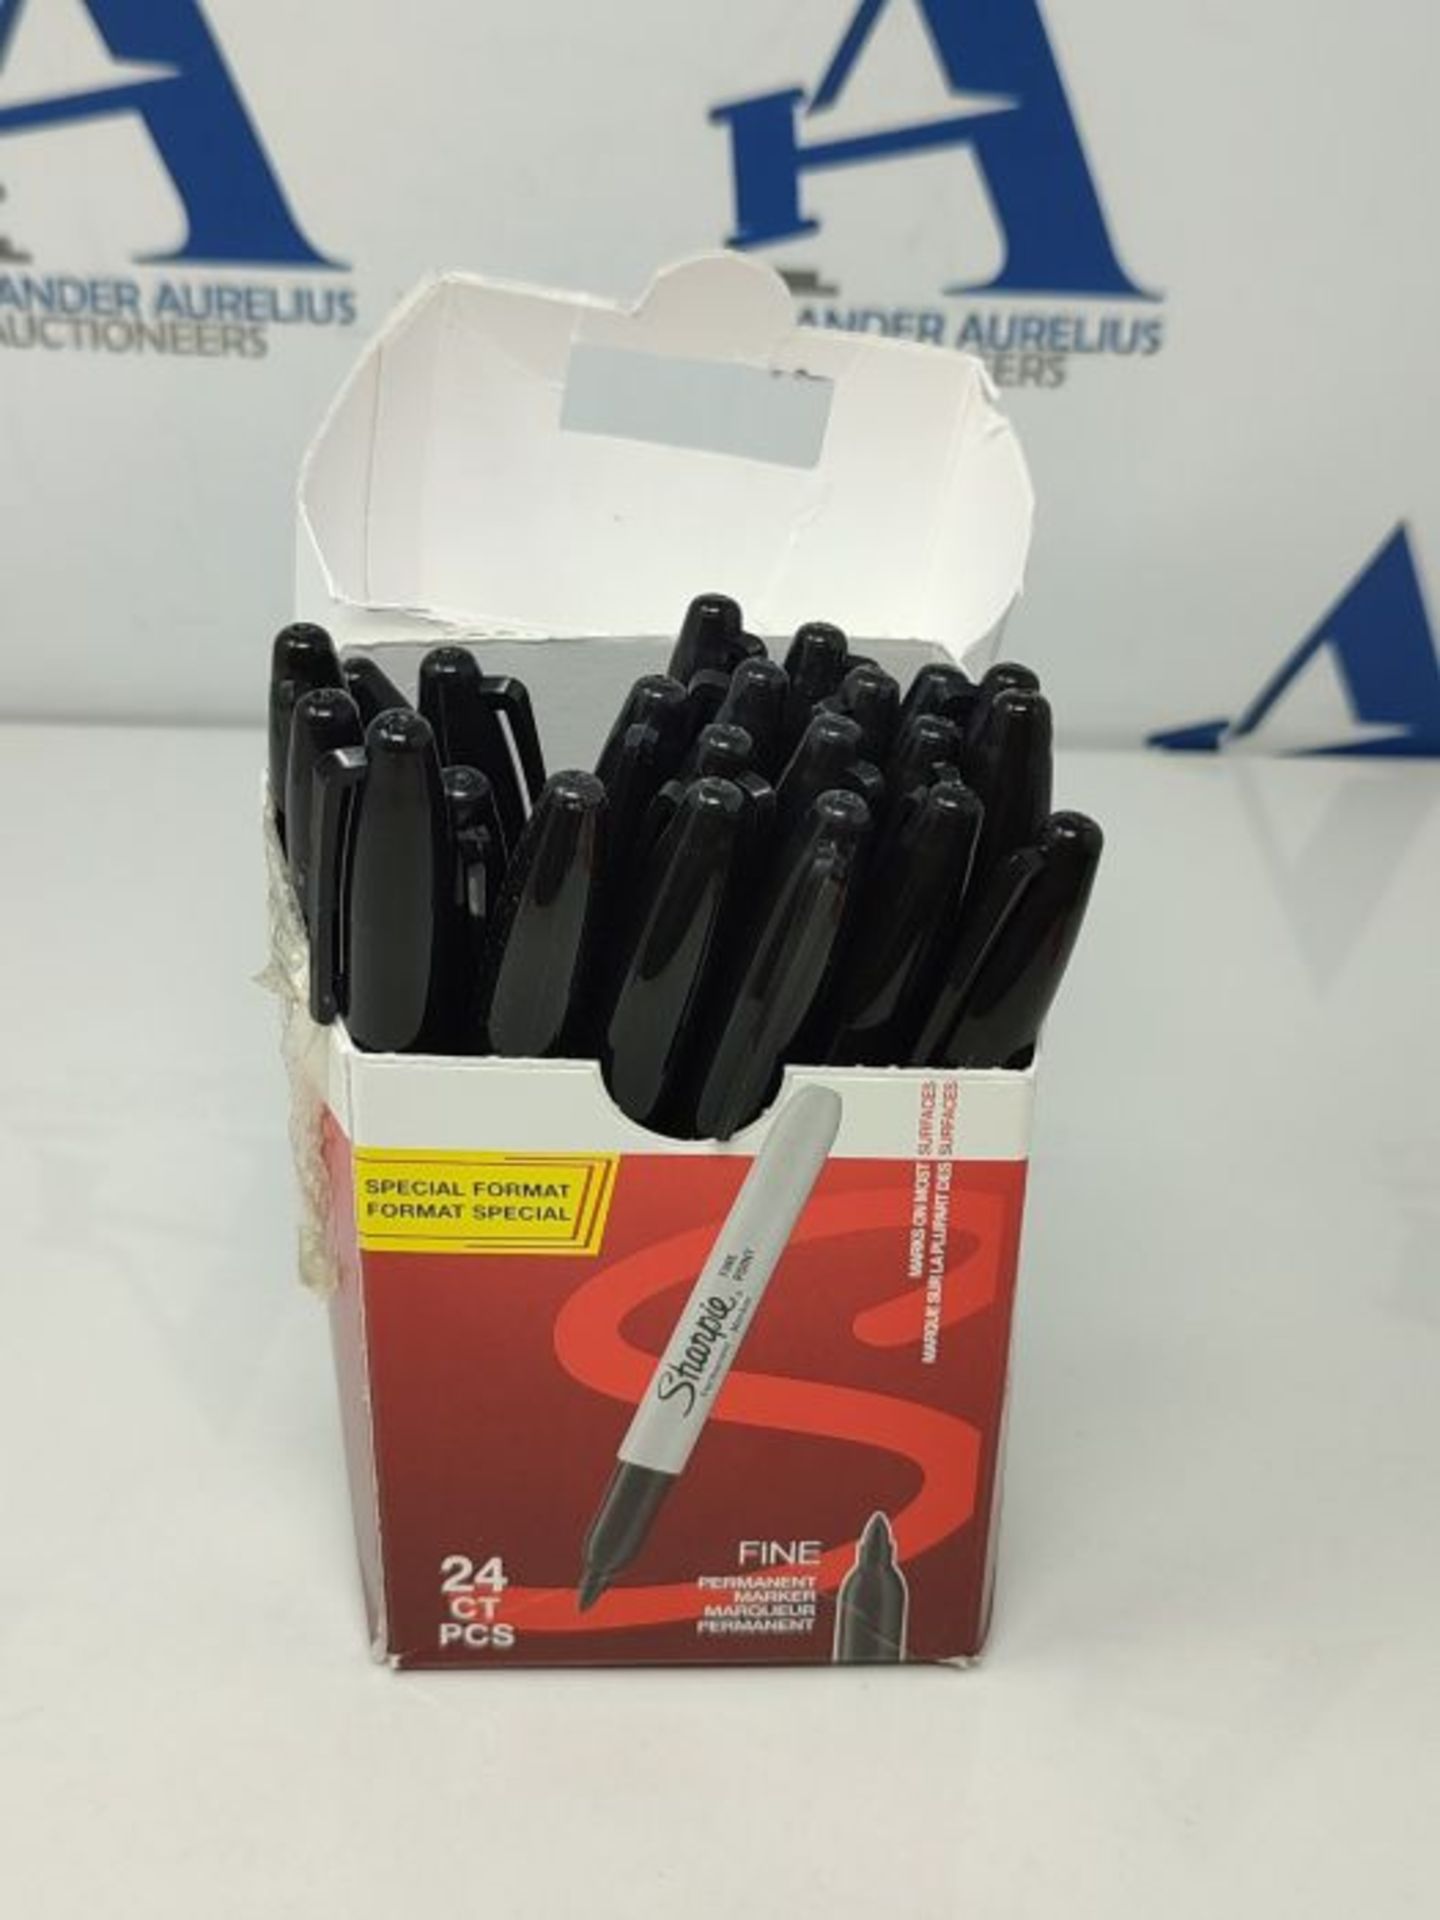 Sharpie Permanent Markers | Fine Point | Black | 24 Count - Image 3 of 3